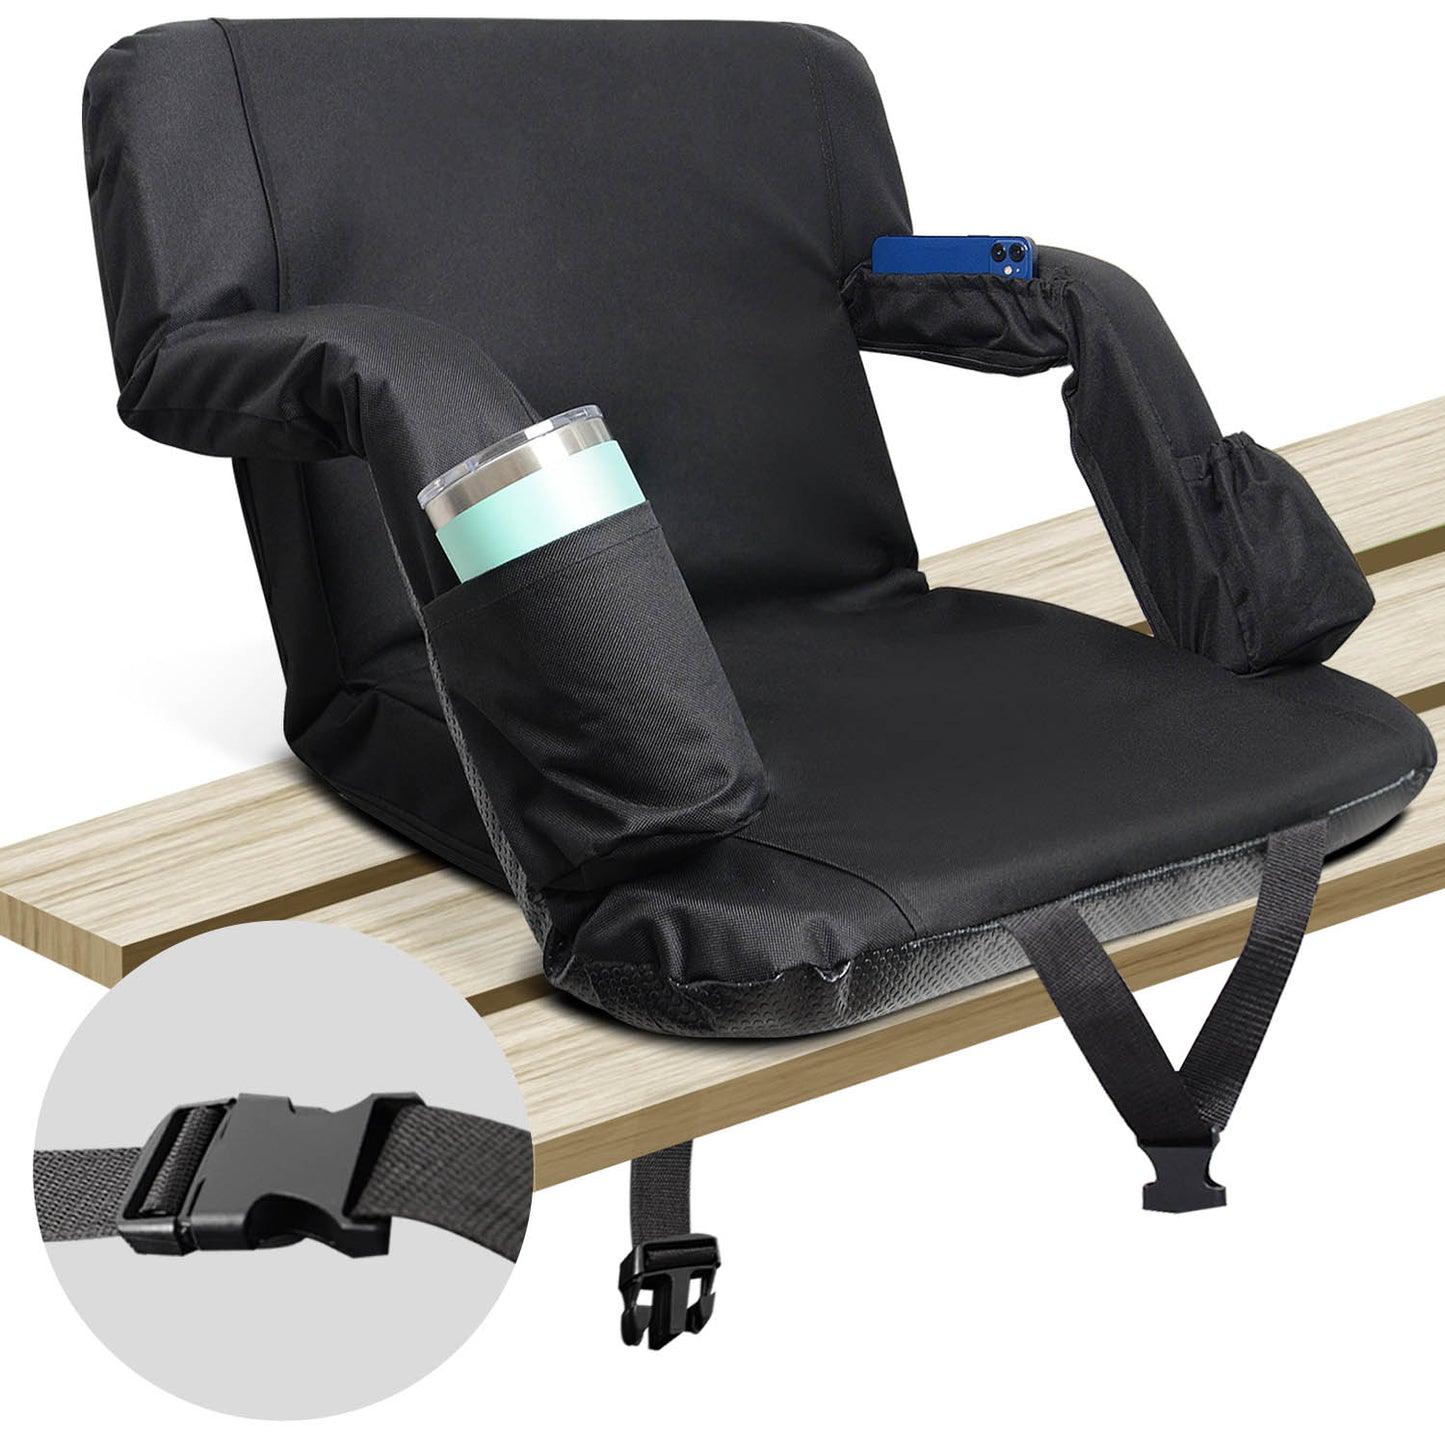 Mynt Wide Stadium Seat for Bleachers, Stadium Chair with Wide Back Support, Adjustable Fix Straps, Backpack Straps, 4 Pockets, Non - Slip Fabric and Thick Filling Material